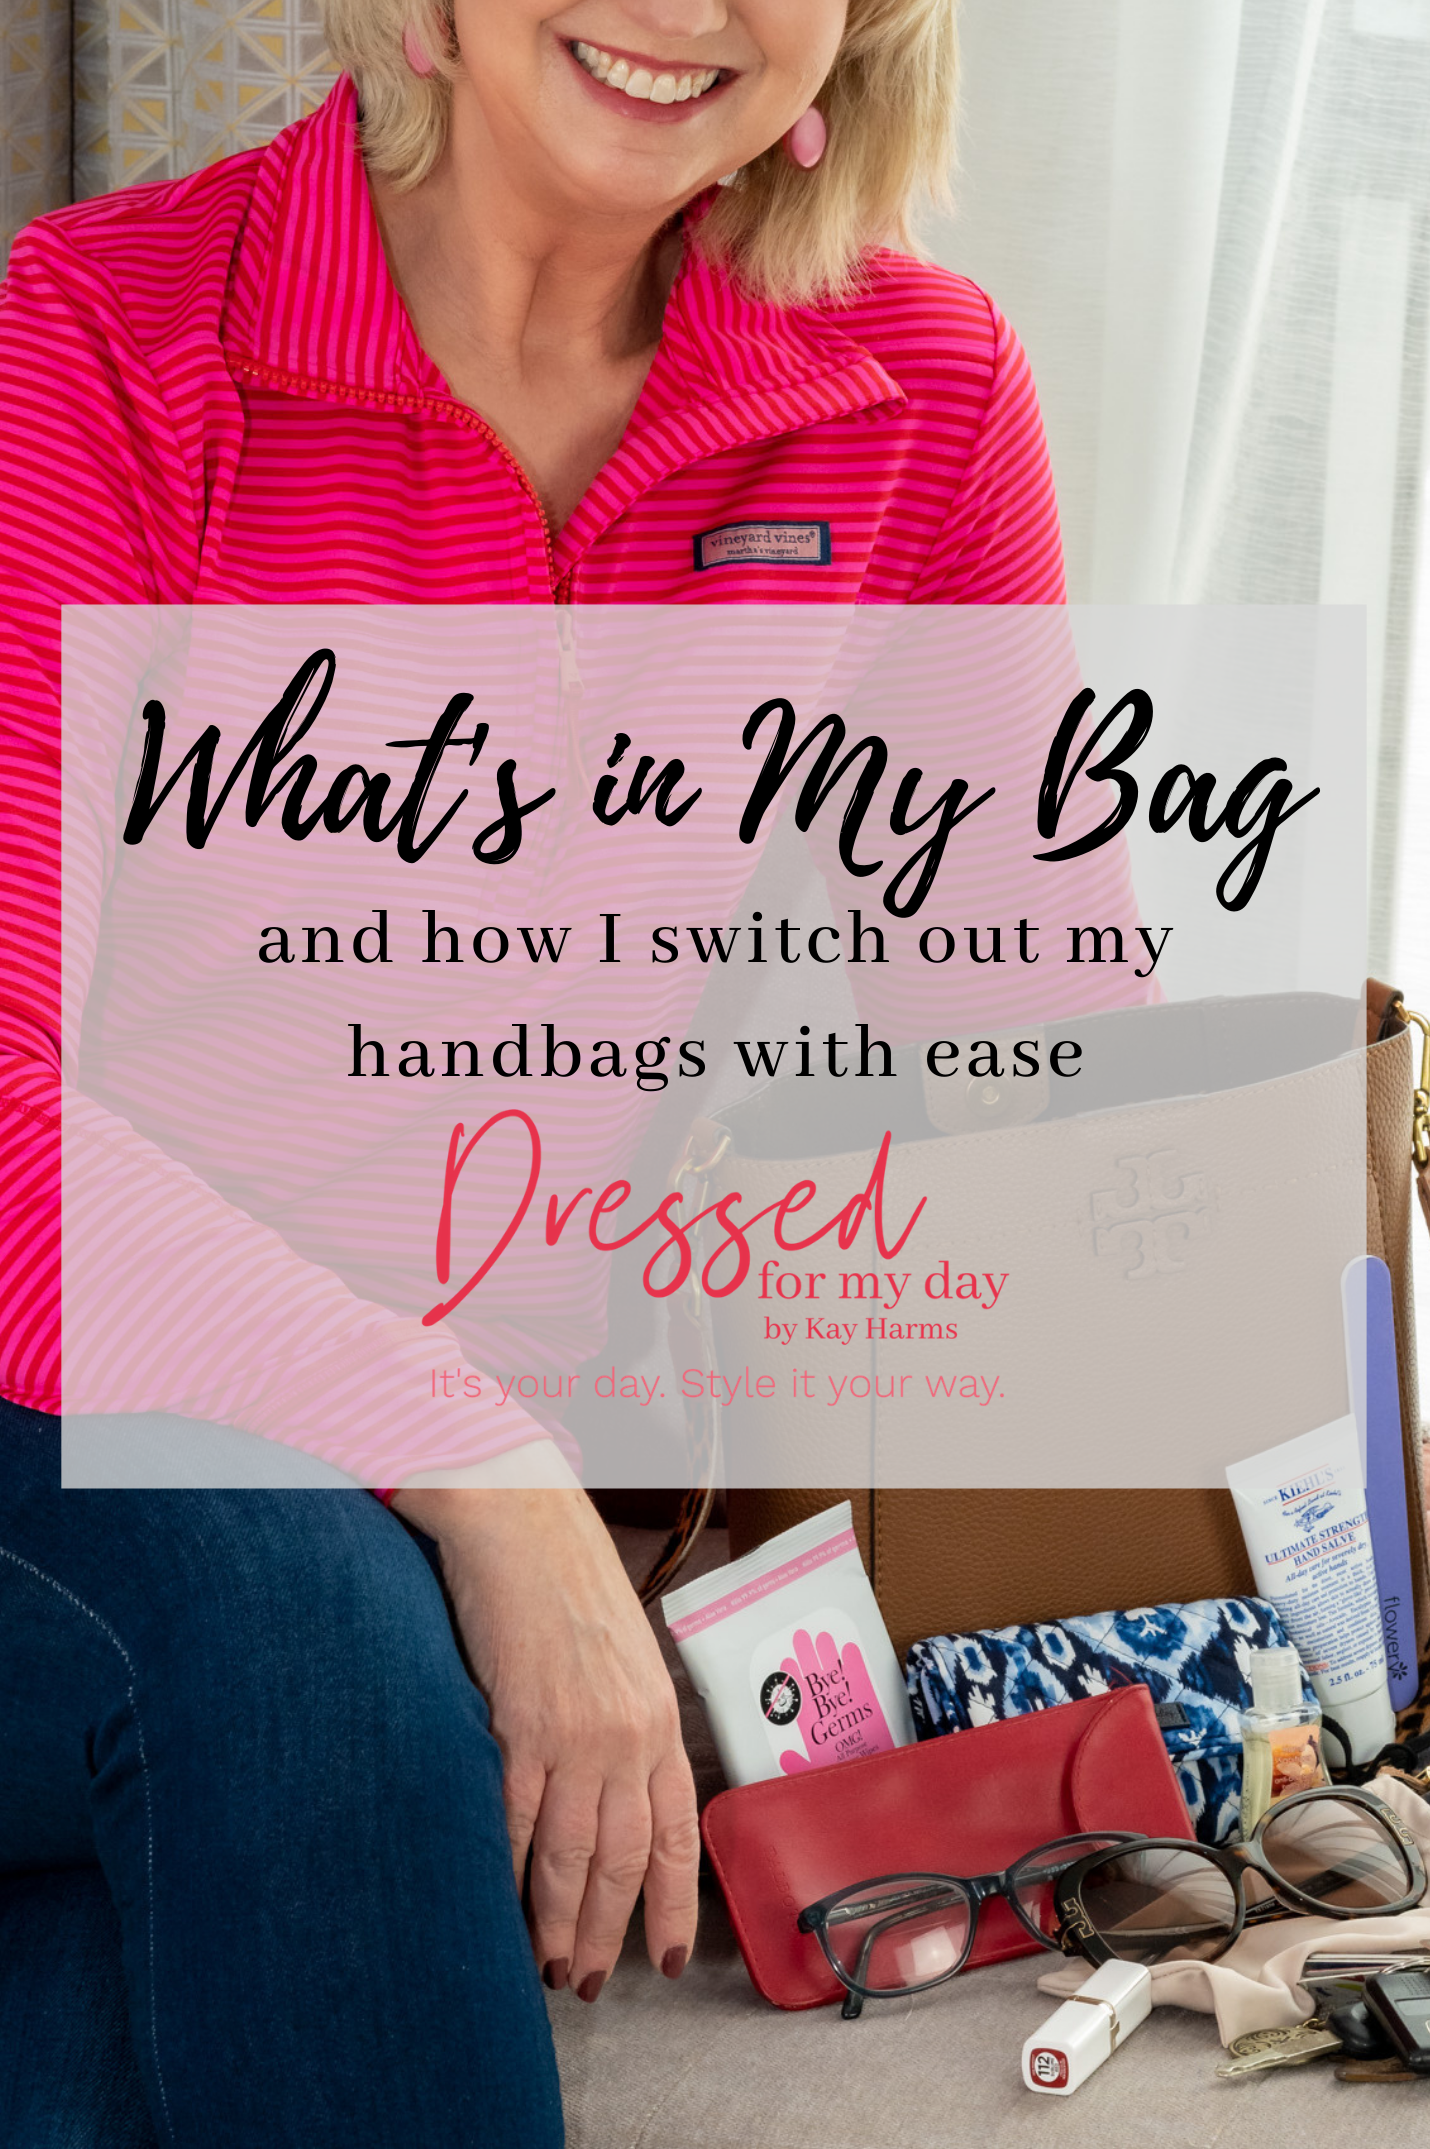 What's in My Bag and How I Switch Out My Handbags with Ease